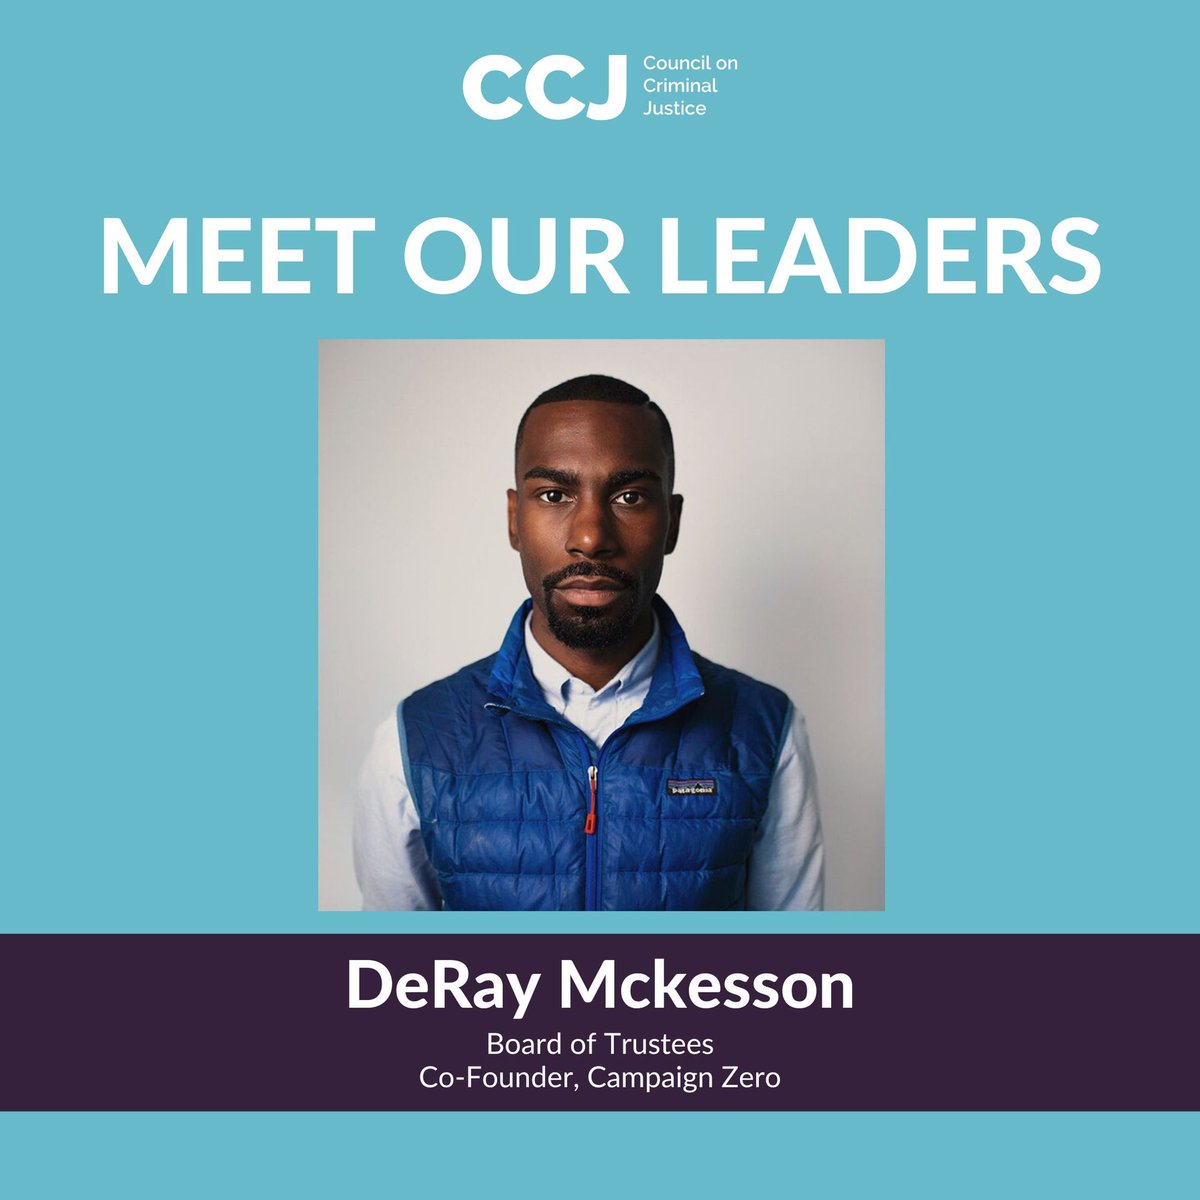 CCJ Trustee @deray is an organizer and activist who was a leading voice in the Black Lives Matter movement and co-founder of @CampaignZero. A widely sought commentator on policing, equity, and justice issues, he hosts the award-winning podcast @PodSaveThePpl.